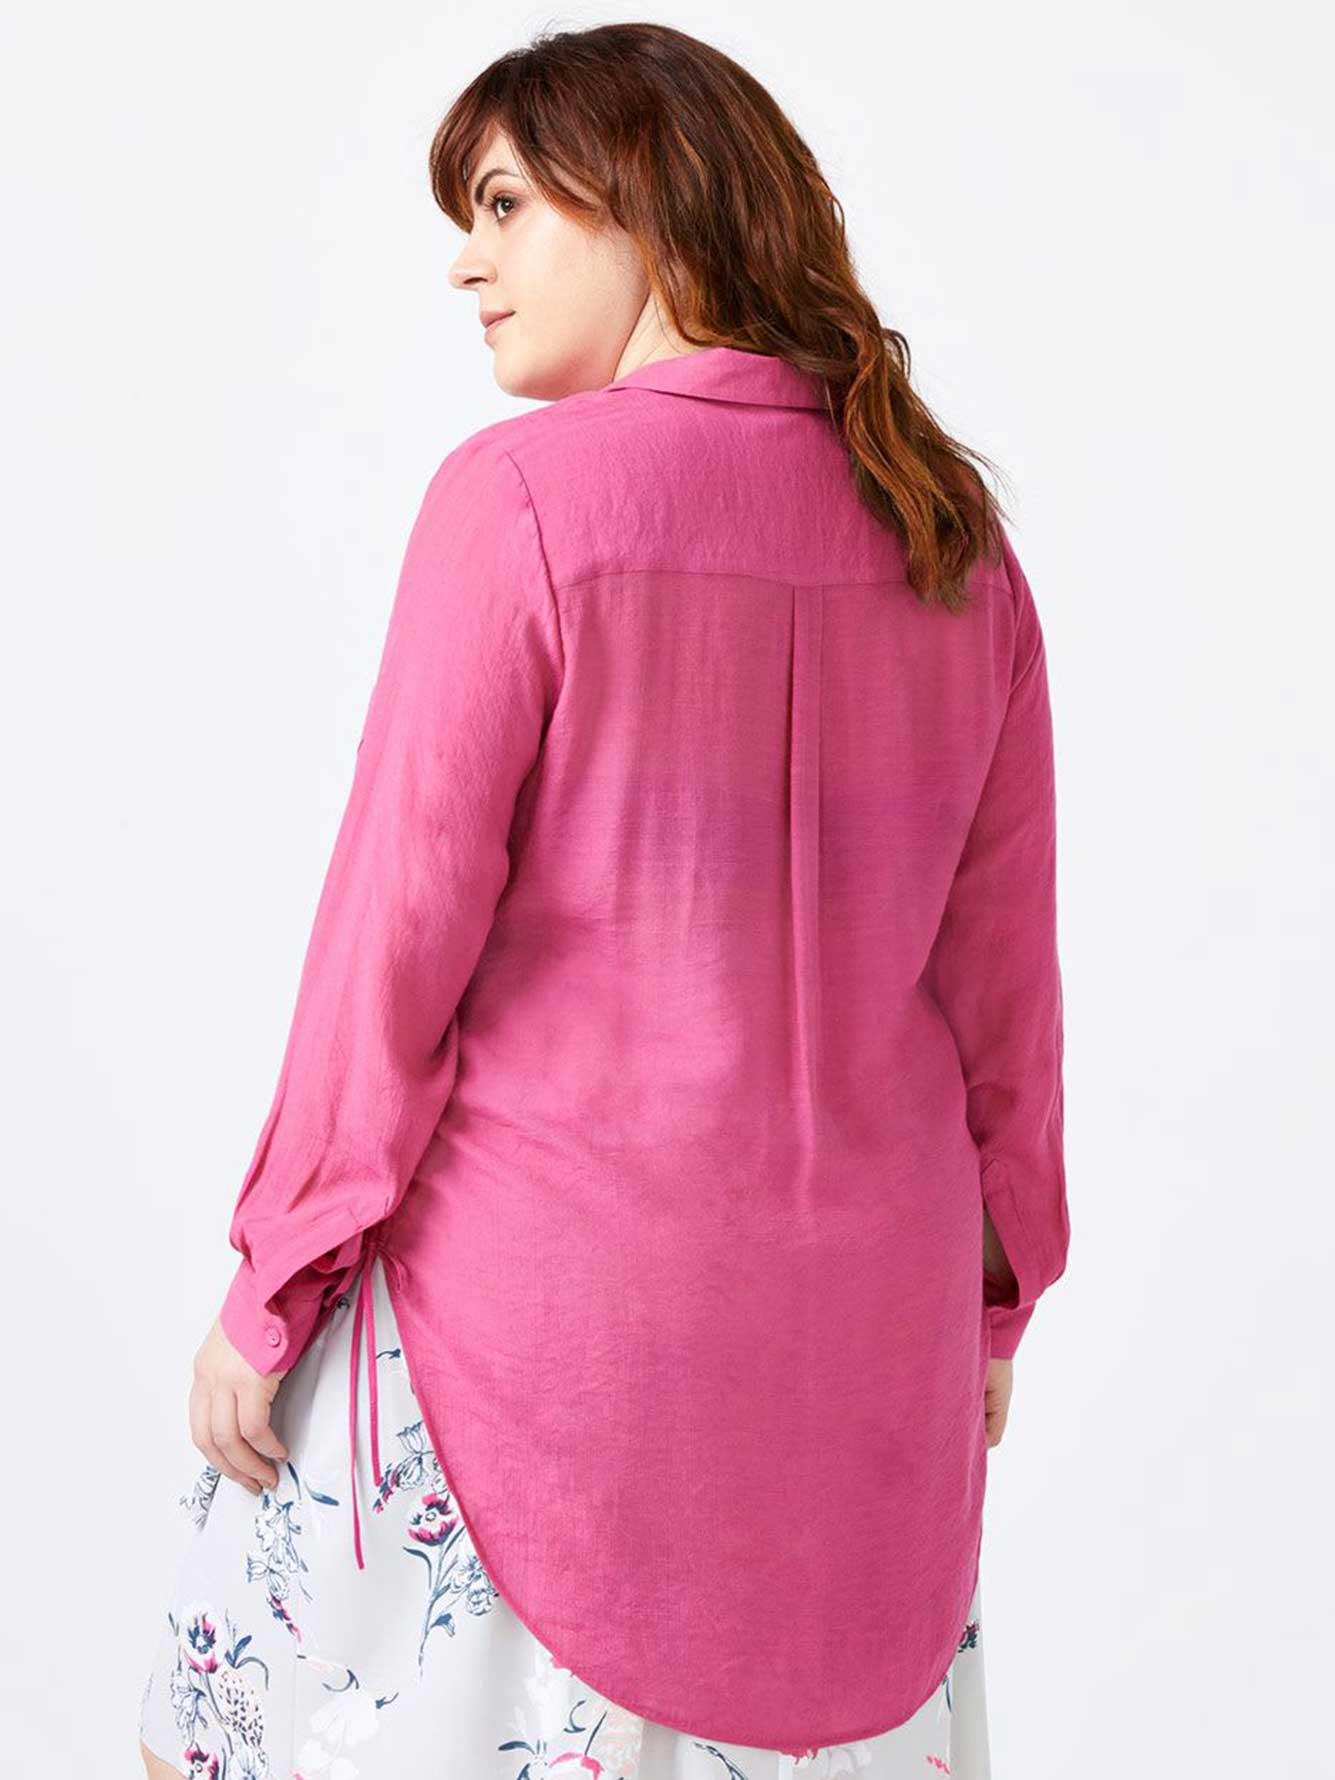 Tunic Blouse with Side Strings - In Every Story | Penningtons